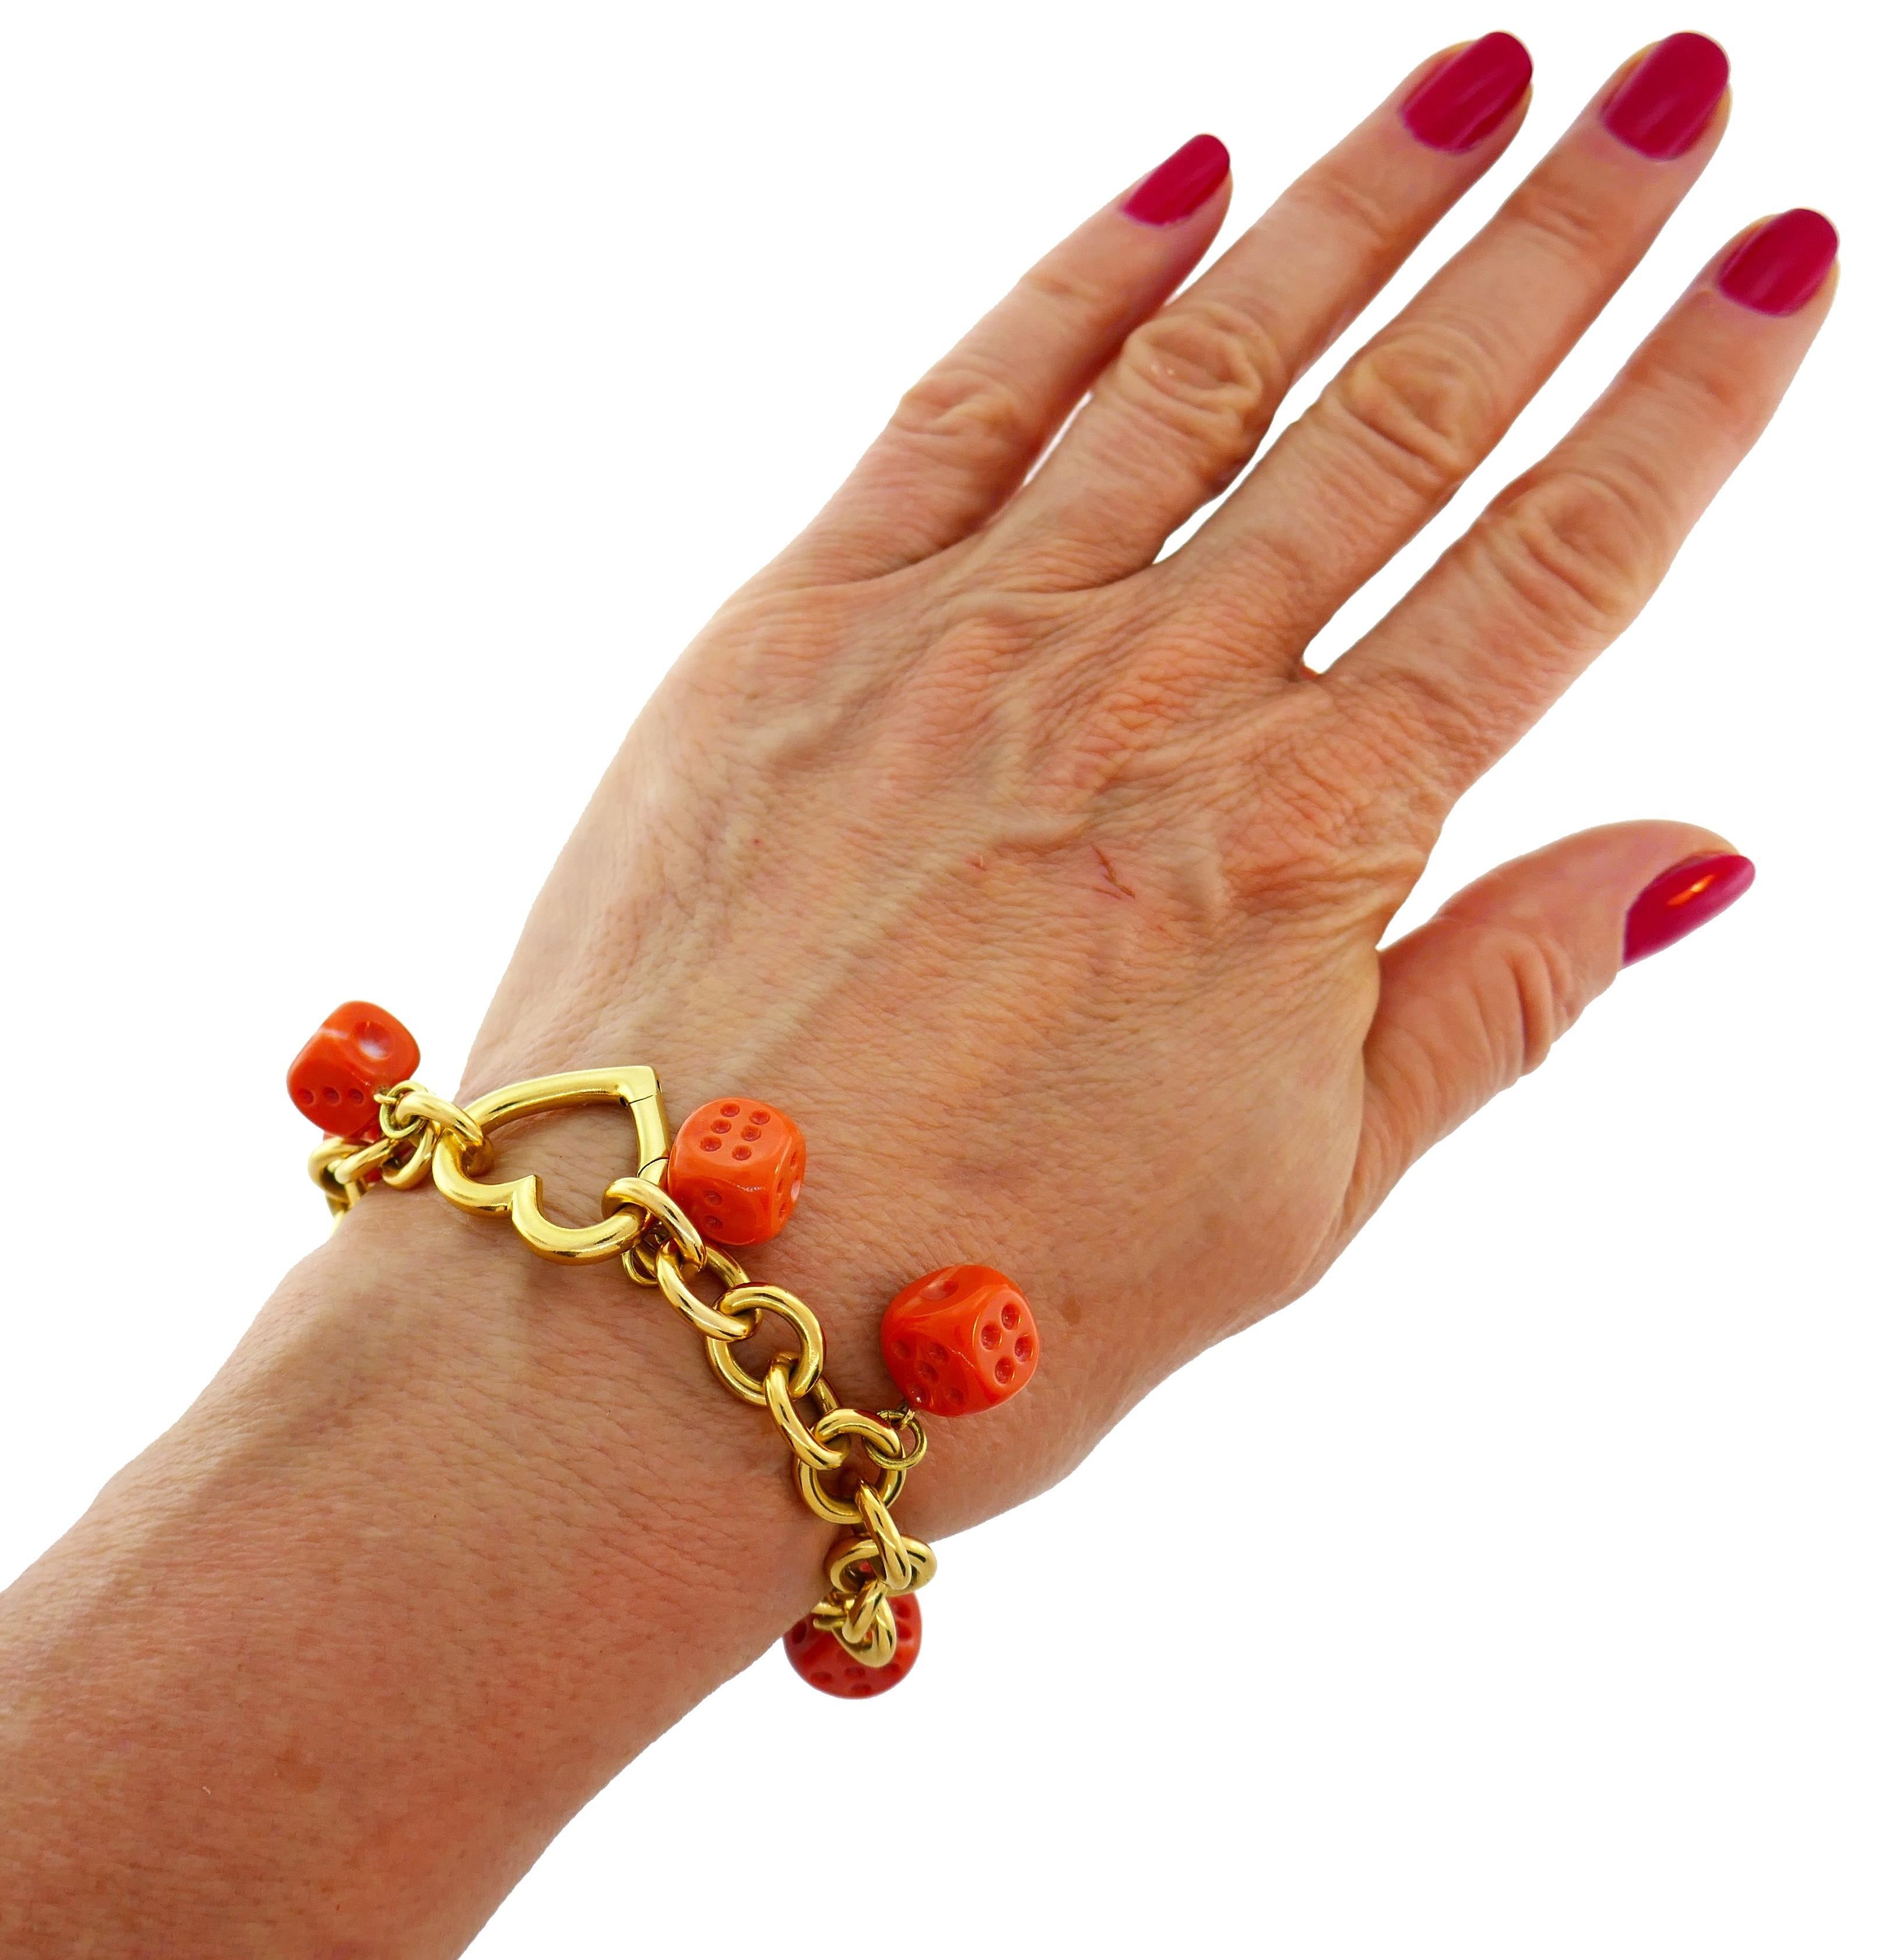 Lovely Tiffany & Co. bracelet with Mediterranean coral dice charms. Wearable and fun, the bracelet is a great addition to your jewelry collection. It brings good luck in a casino ;-)
The bracelet is made of 18 karat yellow gold. 
The bracelet